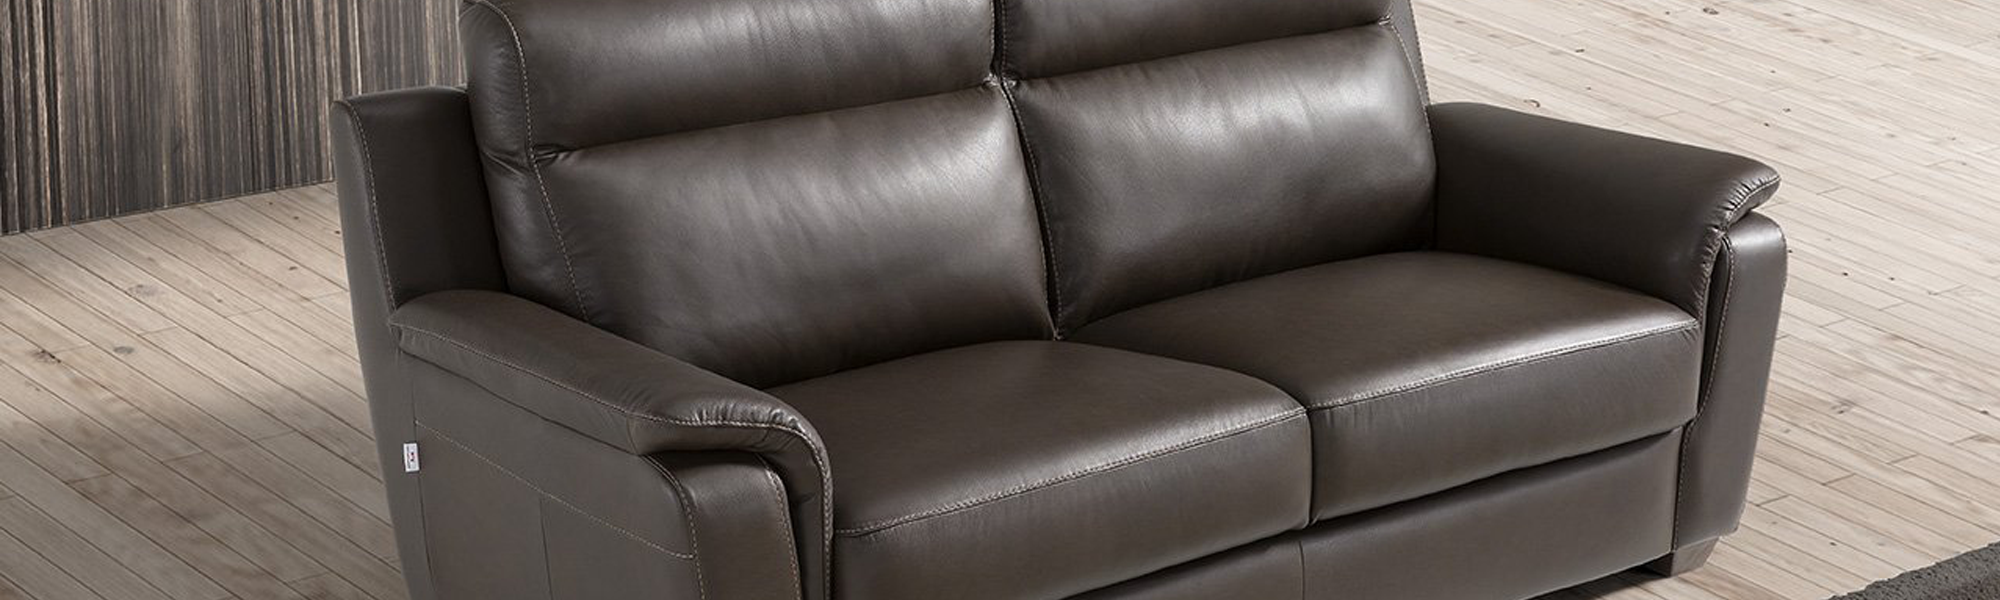 Leather 3 Seater Sofas | Brown, Grey & Cream